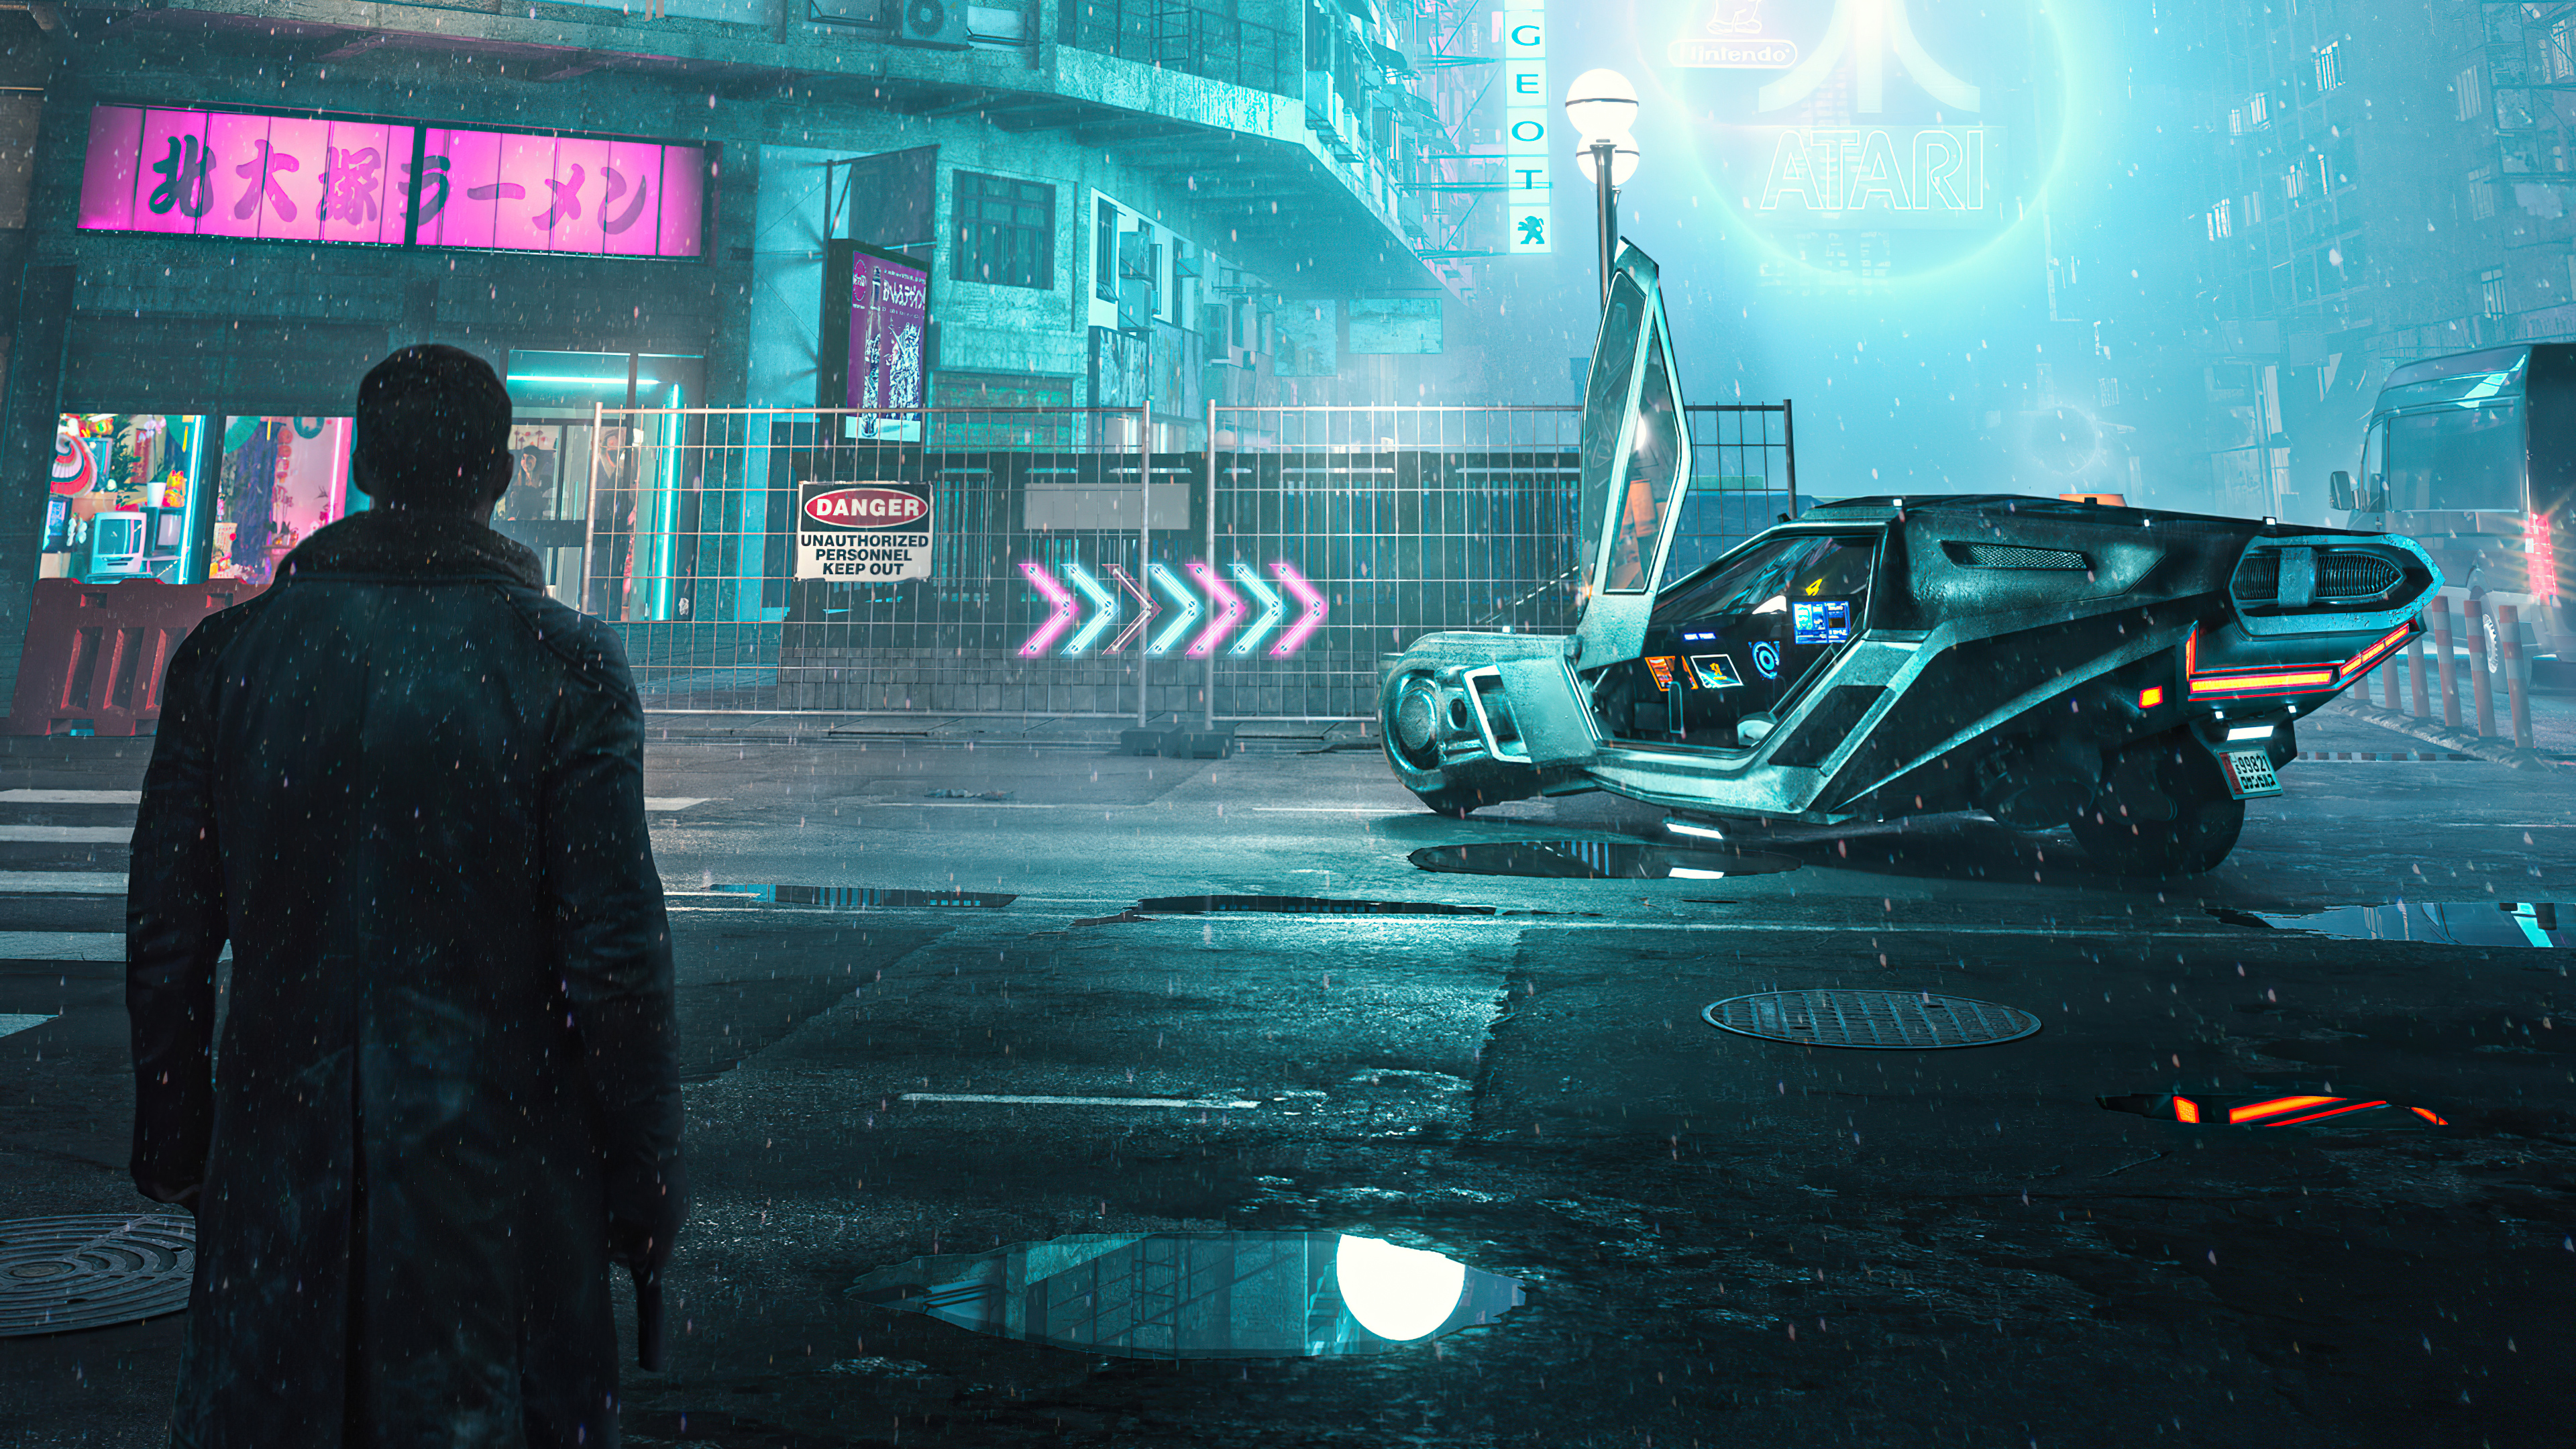 blade runner 2049 tokyo cyberpunk 4k hd artist 4k wallpapers images backgrounds photos and pictures blade runner 2049 tokyo cyberpunk 4k